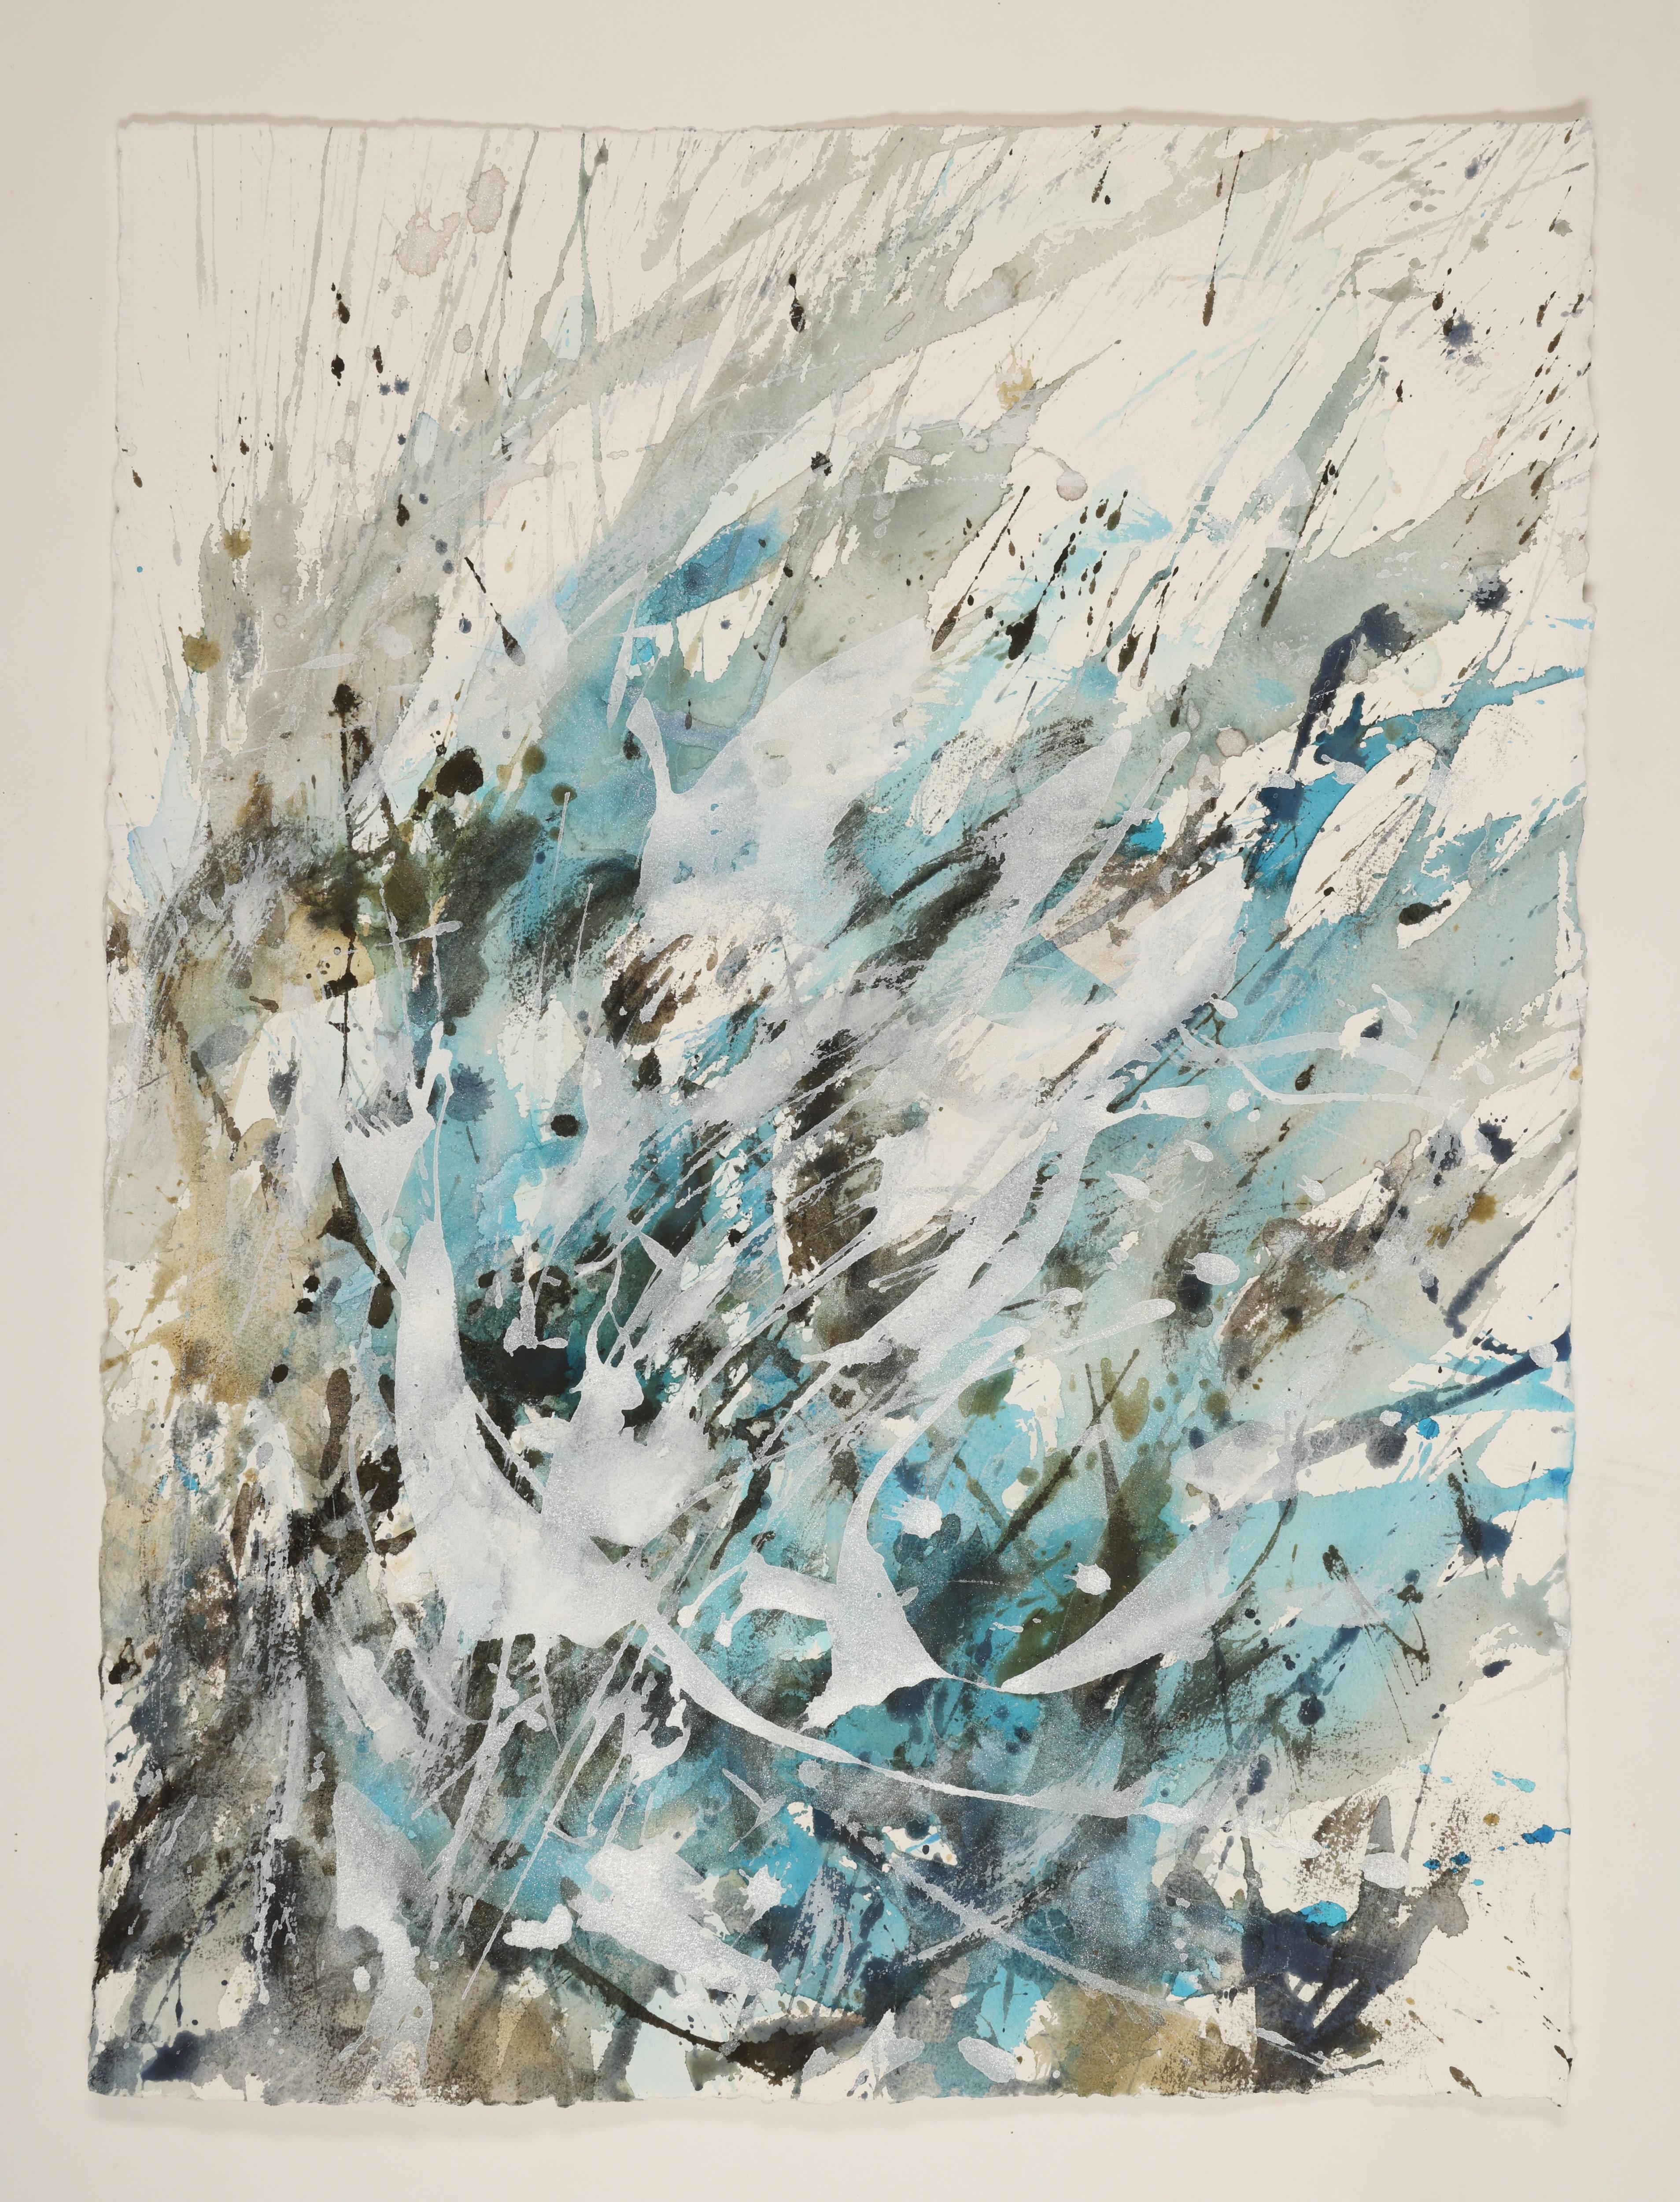 This is a contemporary abstract watercolor painting by artist David Ruth. This series of paintings often feature bright colors and vibrant layouts that draw the viewer in. They are created to help conceptualize his work before turning it into cast